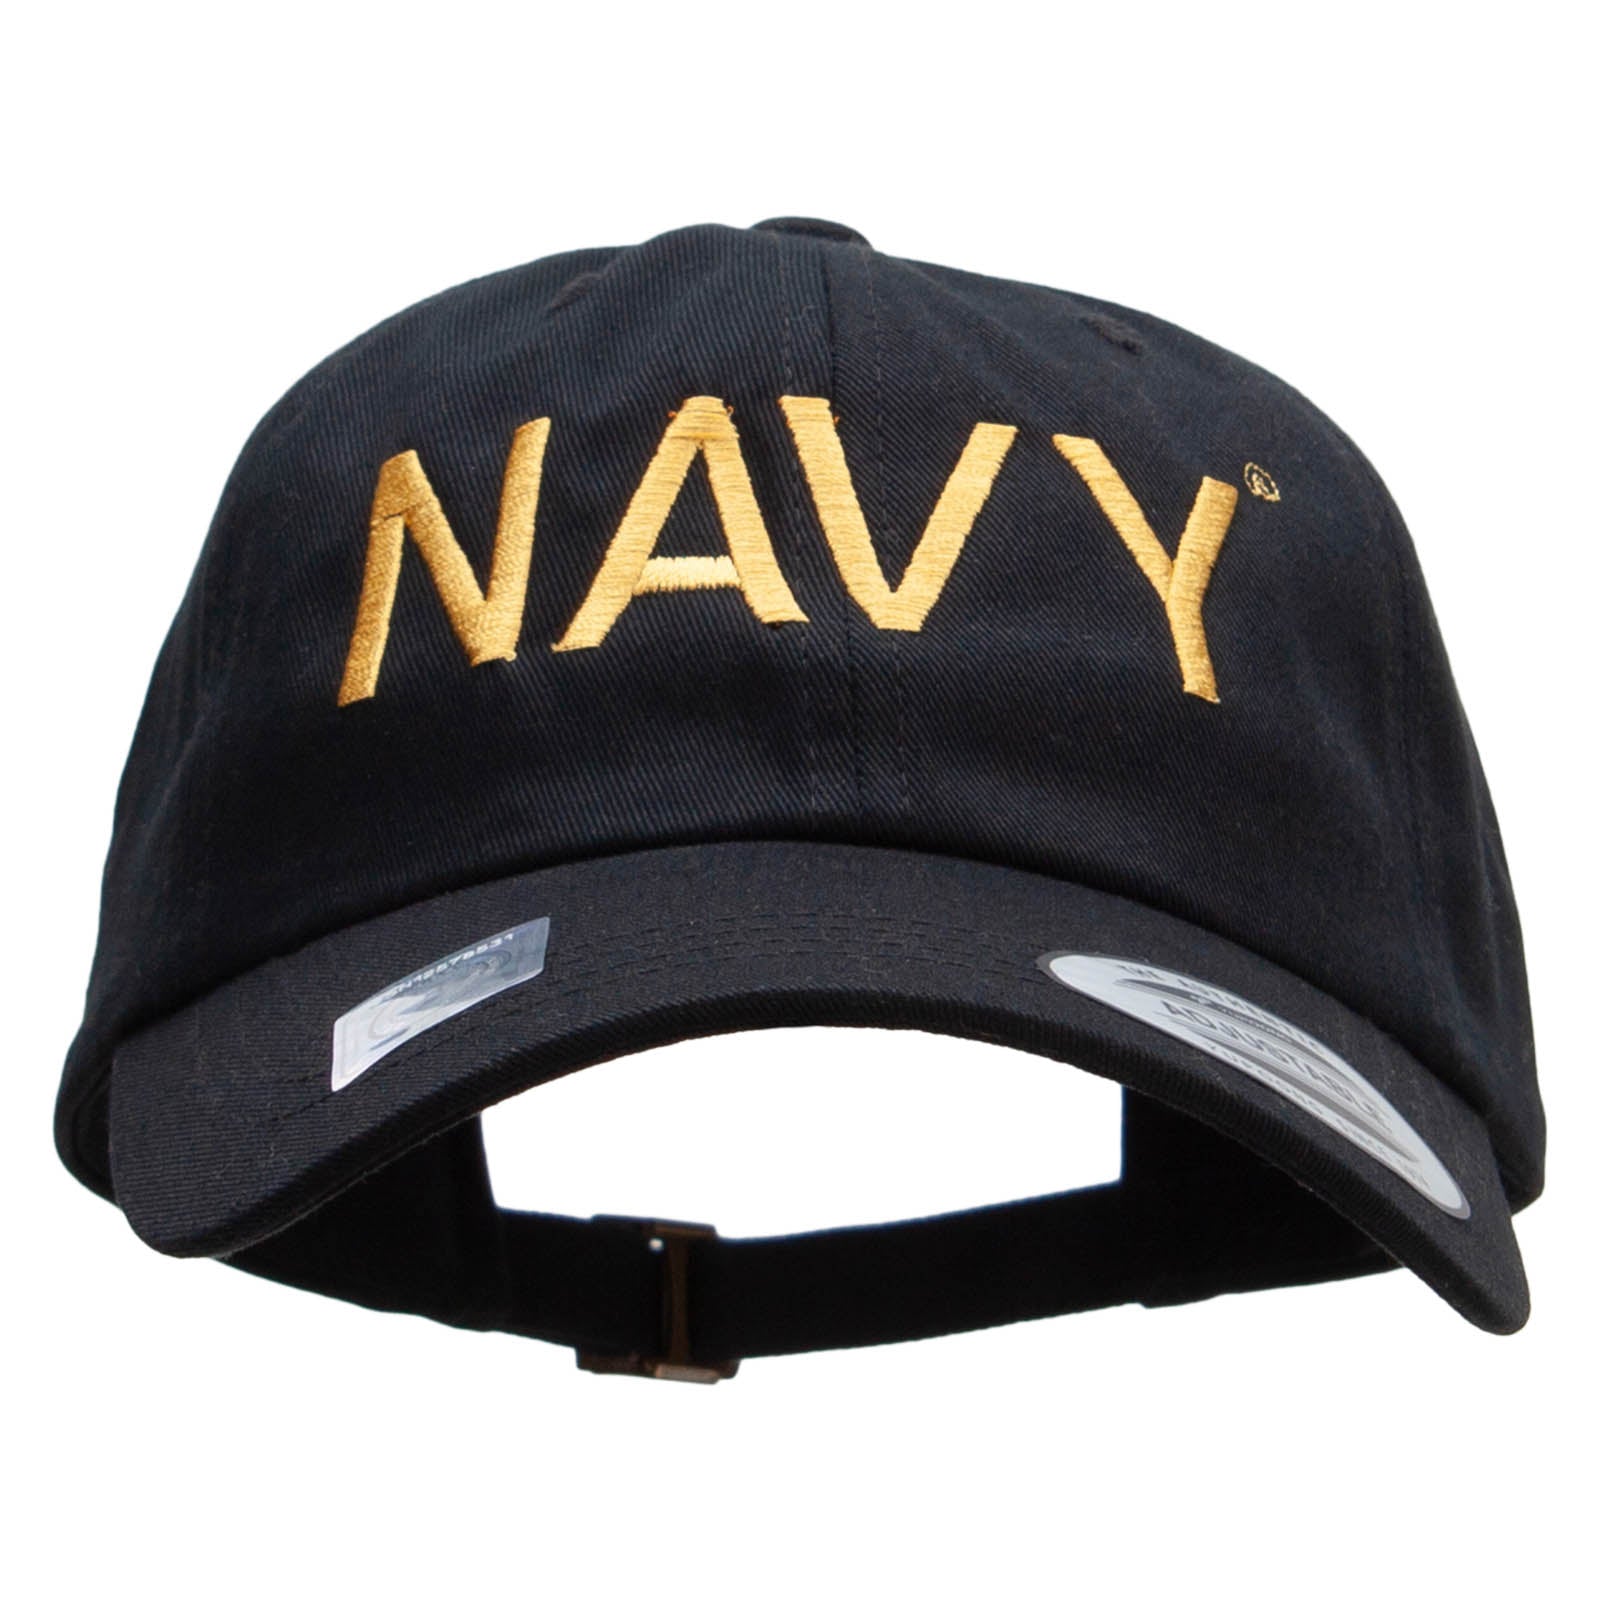 Licensed United States Navy Unstructured Low Profile 6 panel Cotton Cap - Black OSFM